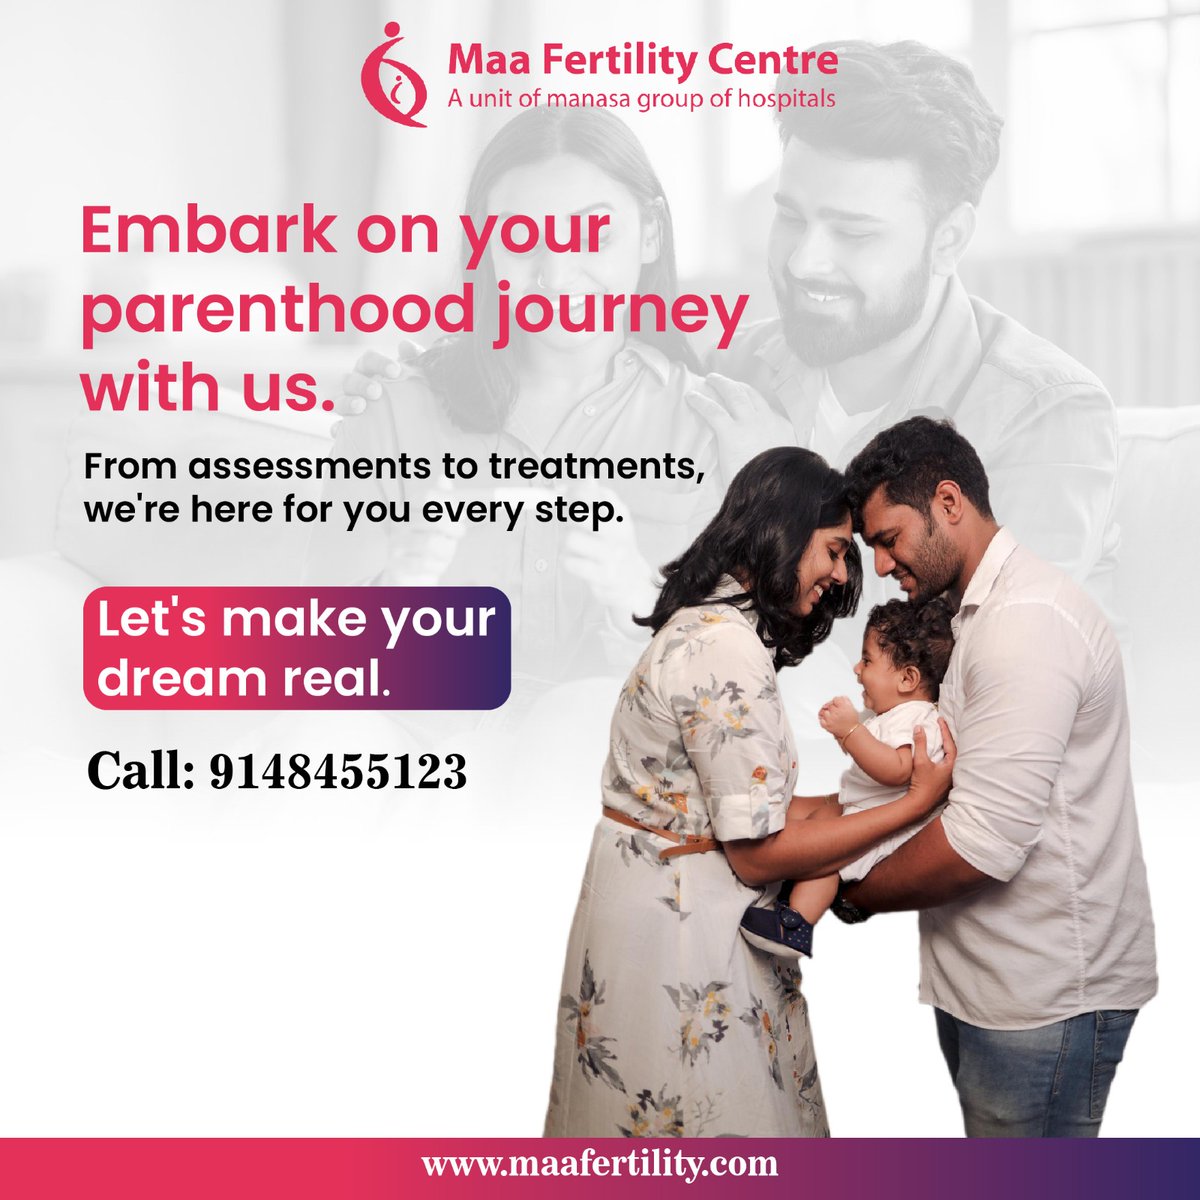 Embark on your parenthood journey with us and let's turn your dreams into reality. At MaaFertility, we understand the complexities and emotions that come with fertility challenges. 
#MaaFertility #ParenthoodJourney #FertilityClinic #DreamsIntoReality #familybuilding